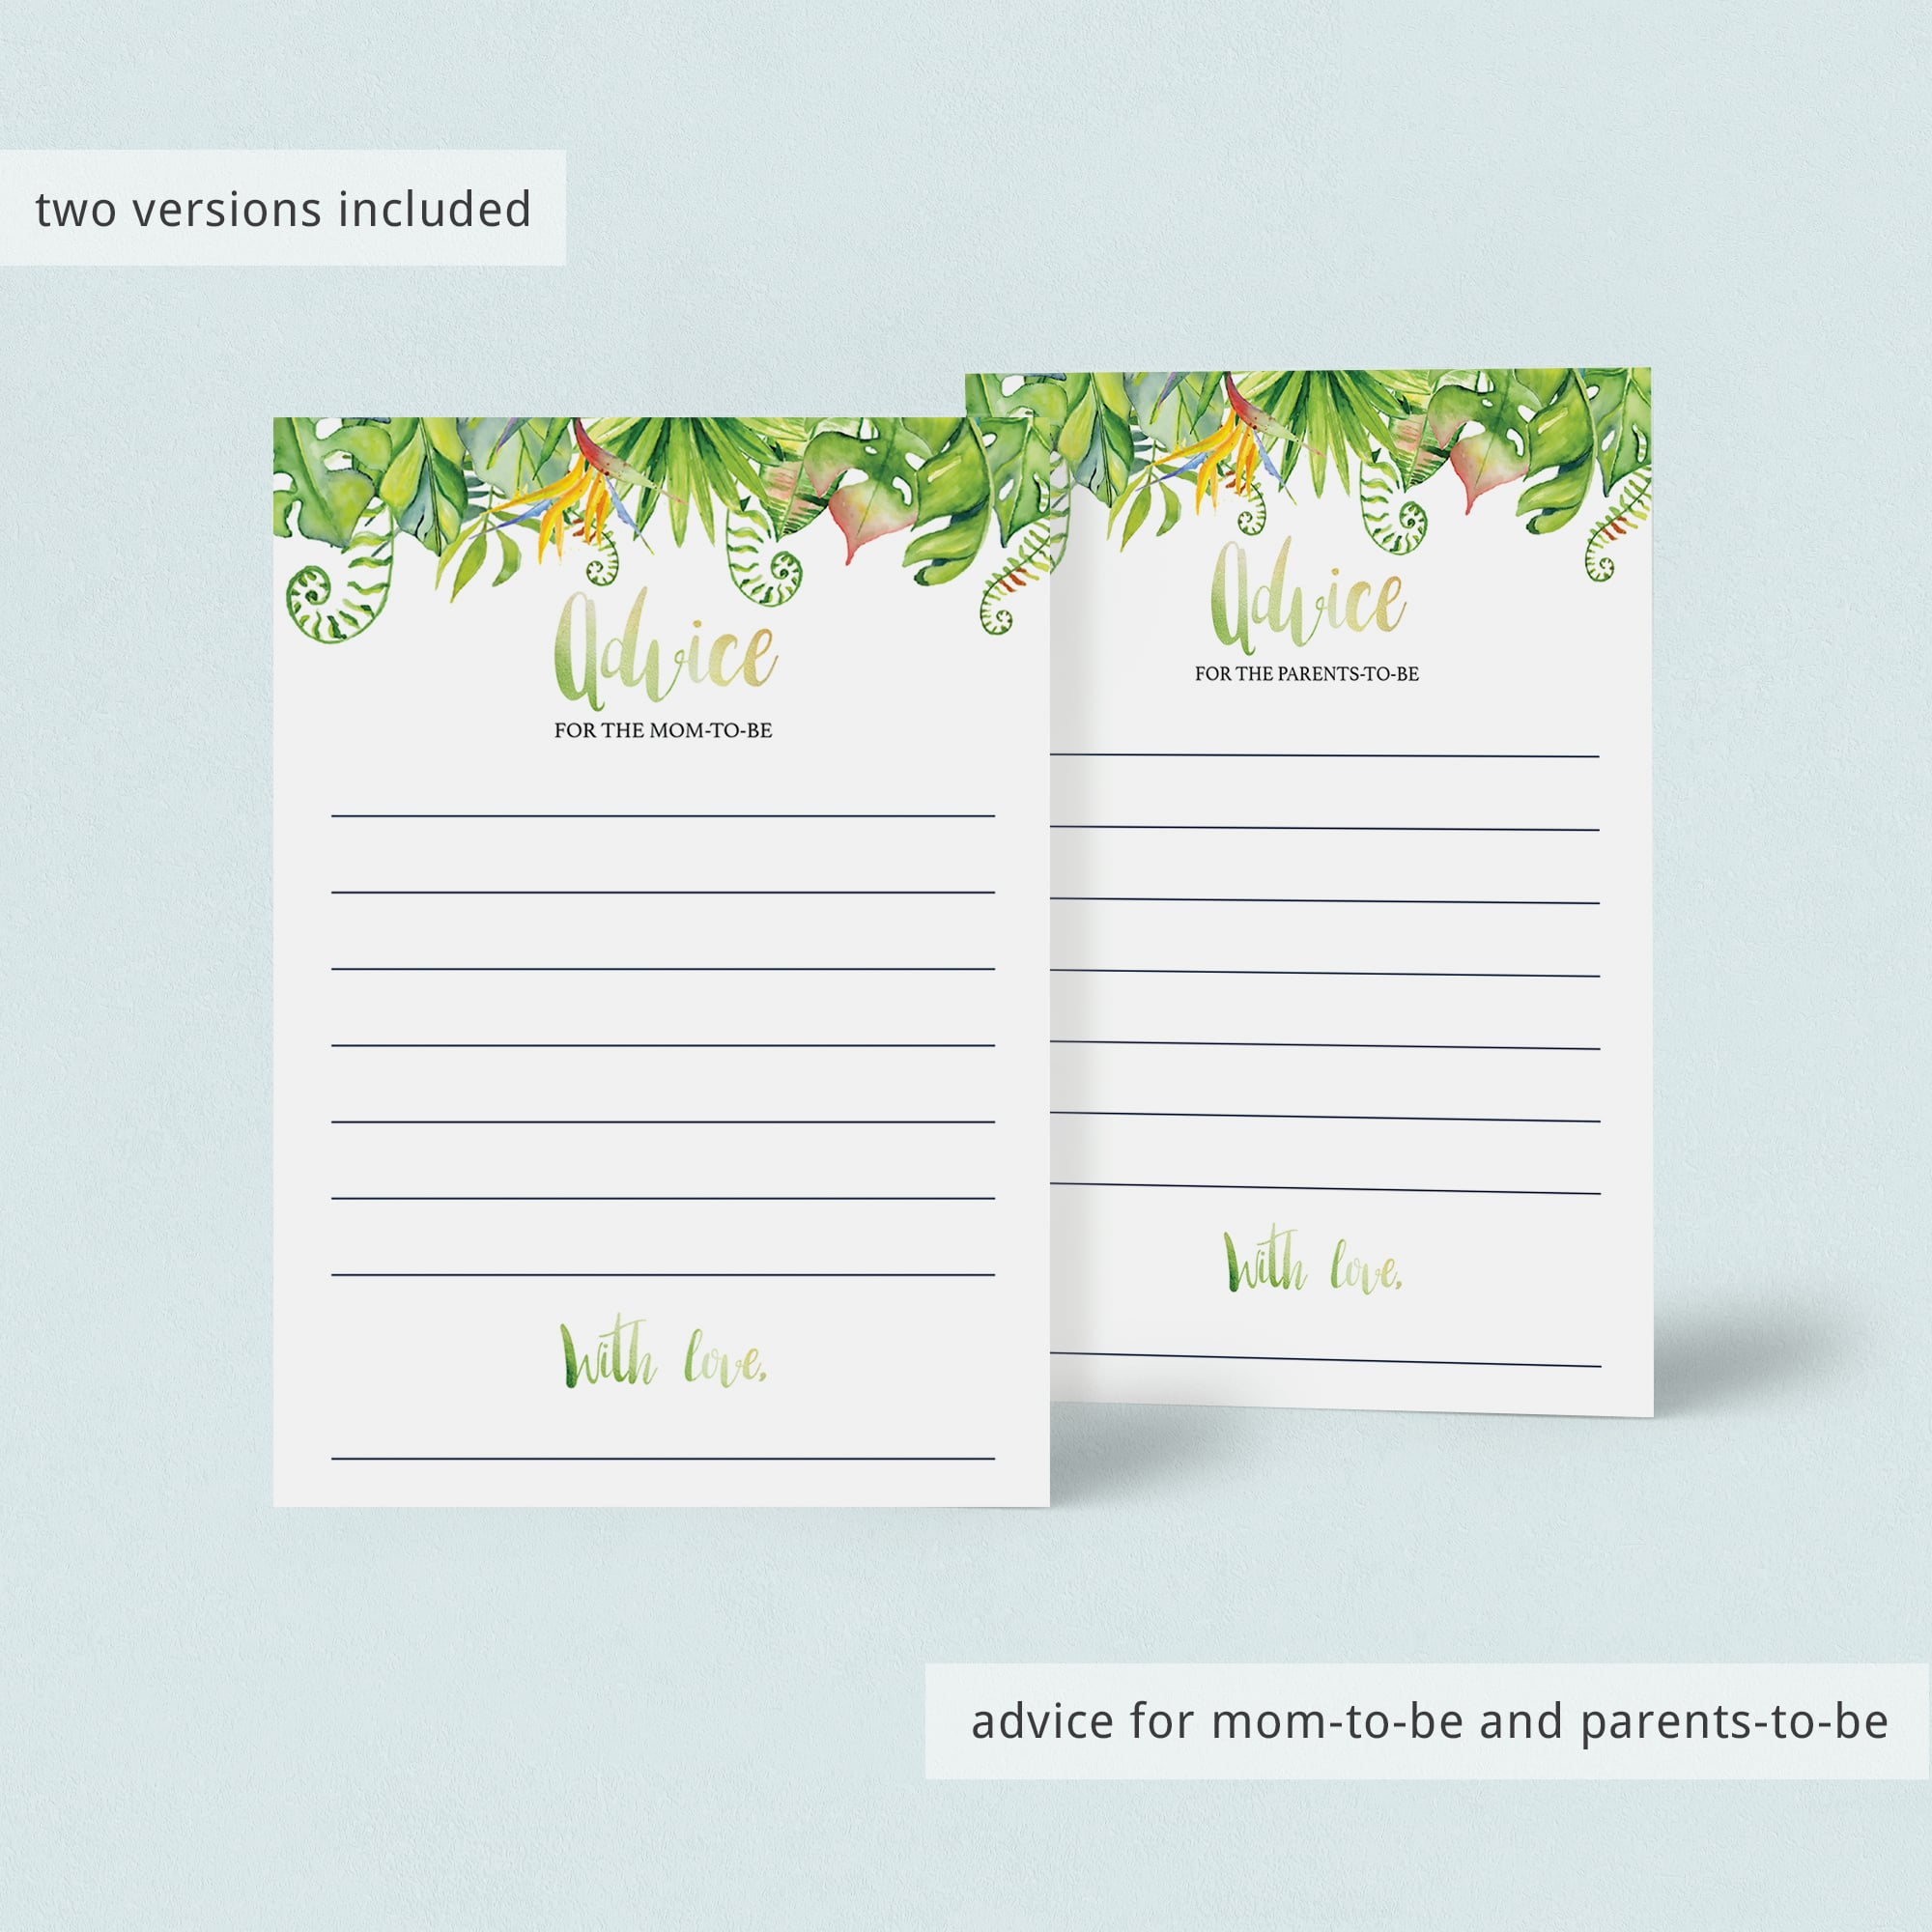 Baby advice card for hawaii party by LittleSizzle